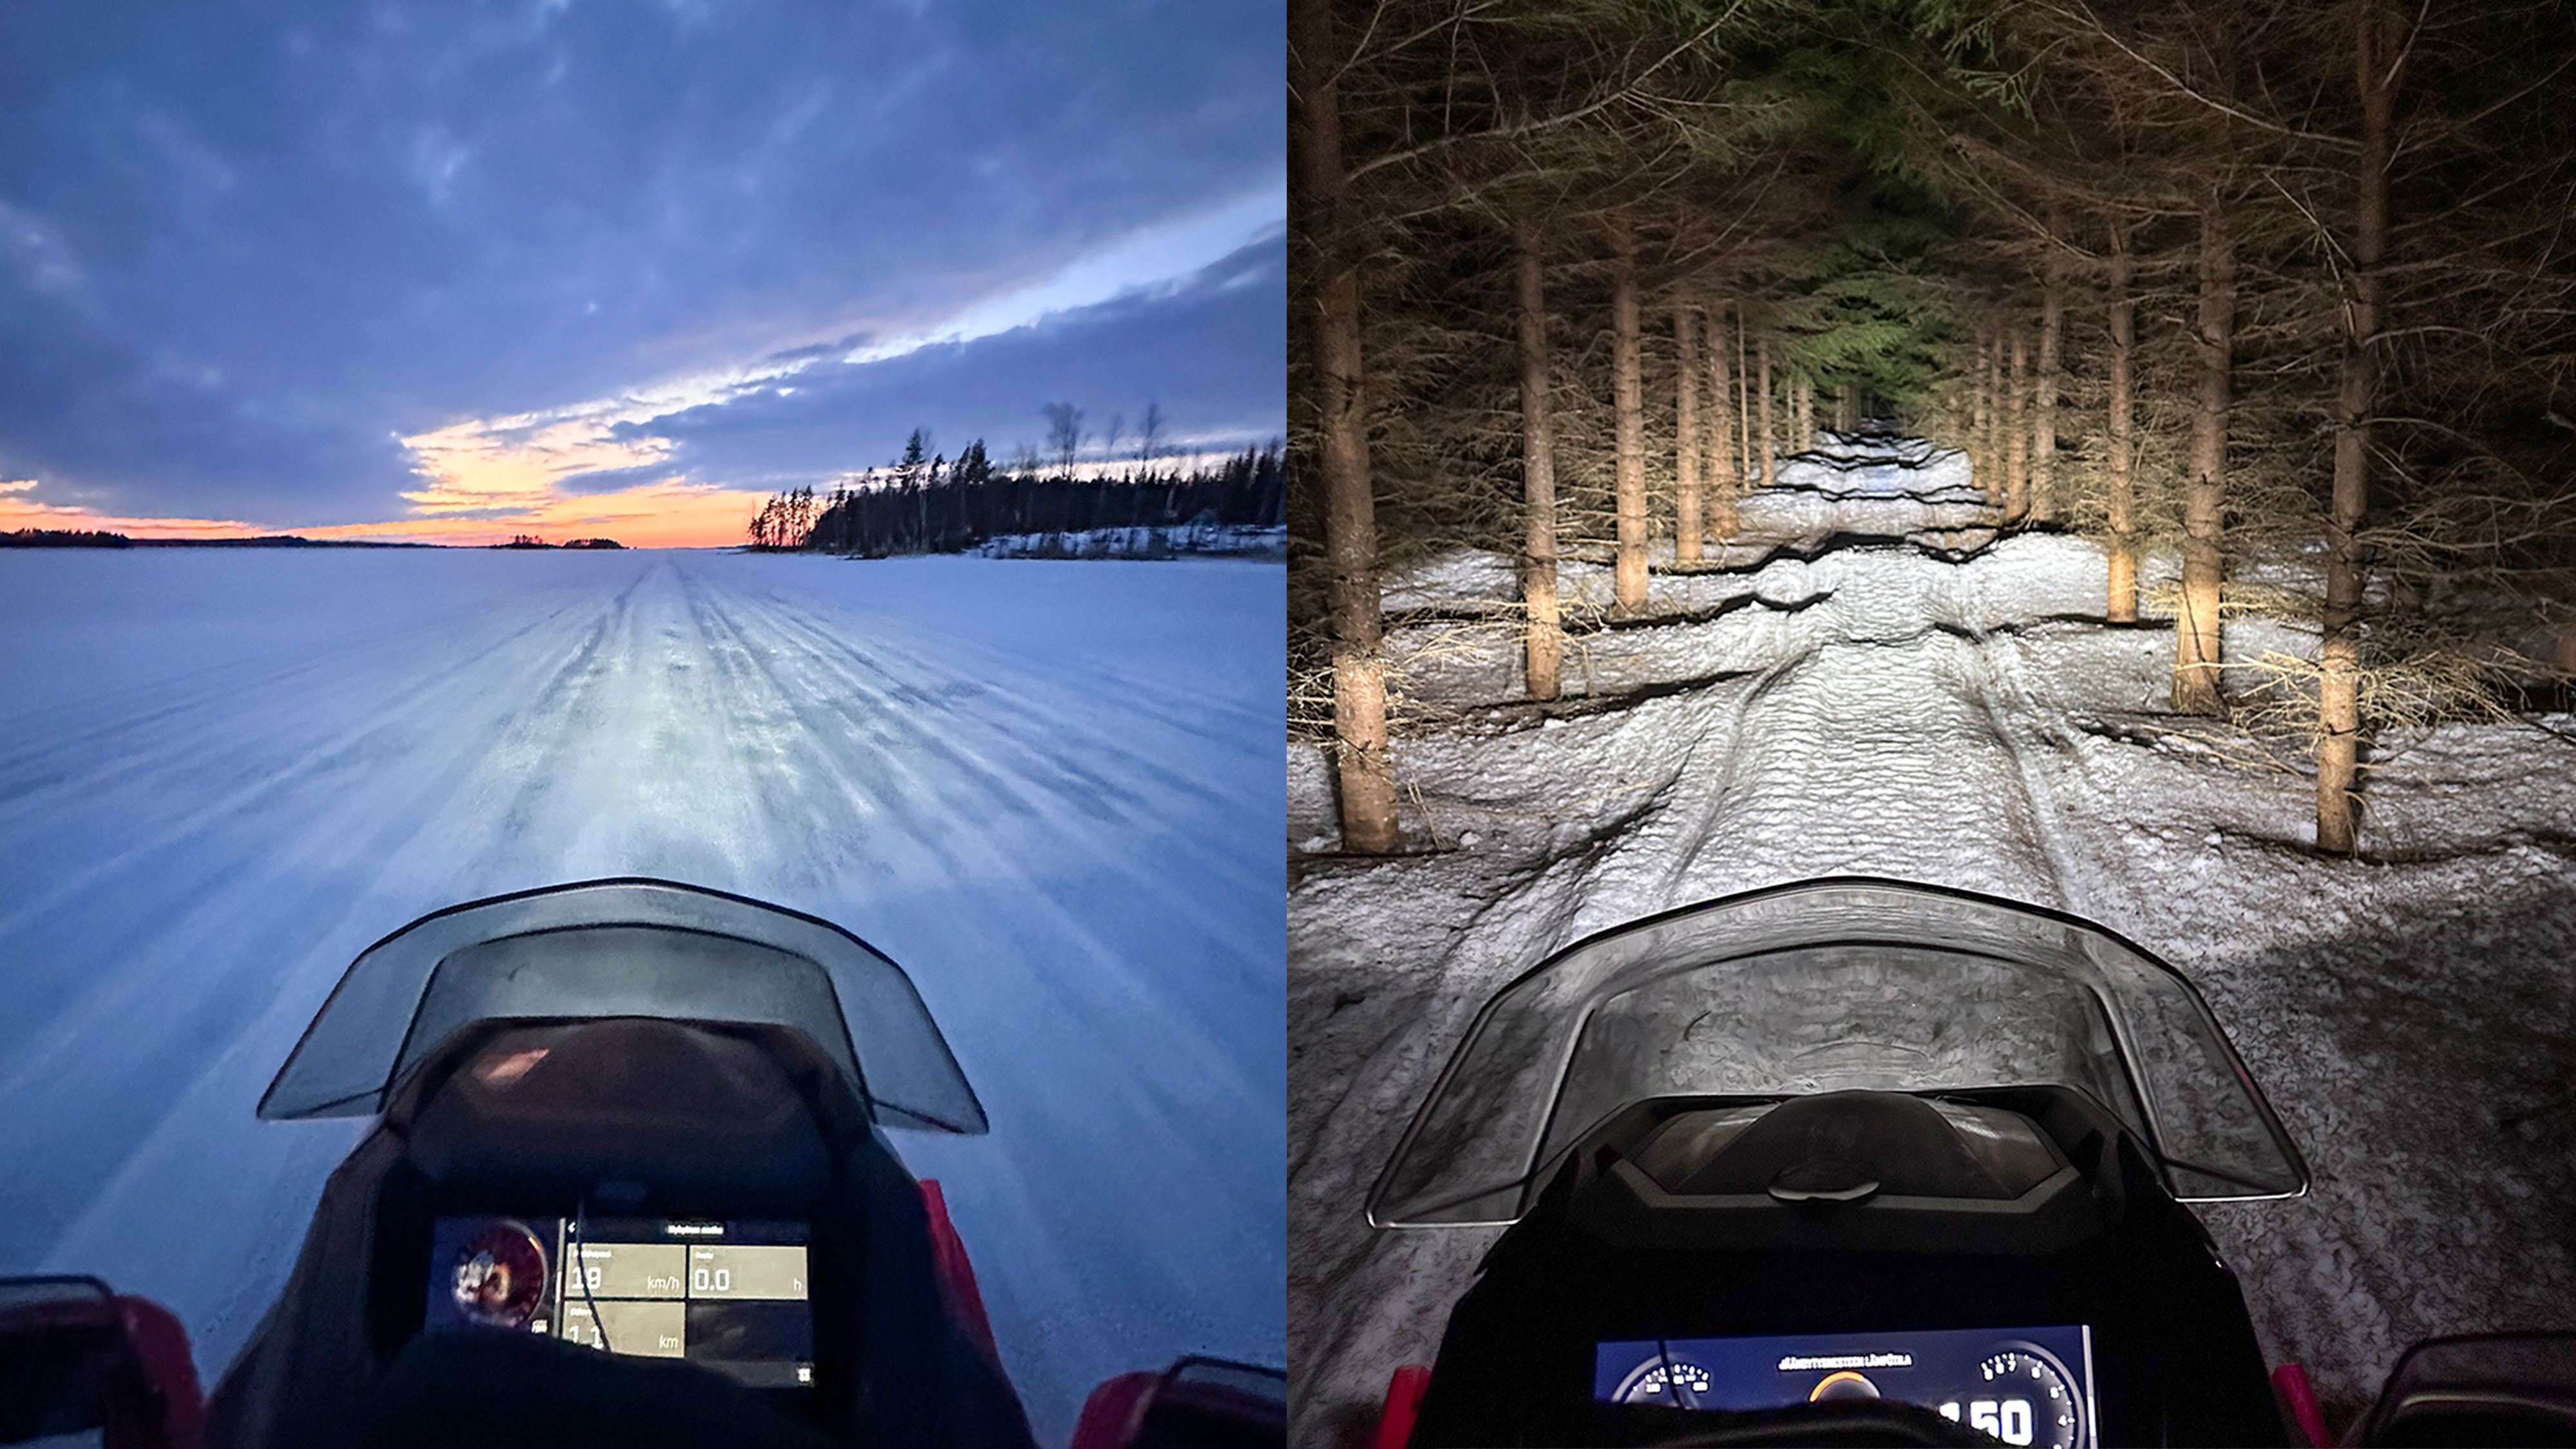 Montage of a cockpit view of a Lynx snowmobile riding on a frozen lake and bumpy trail